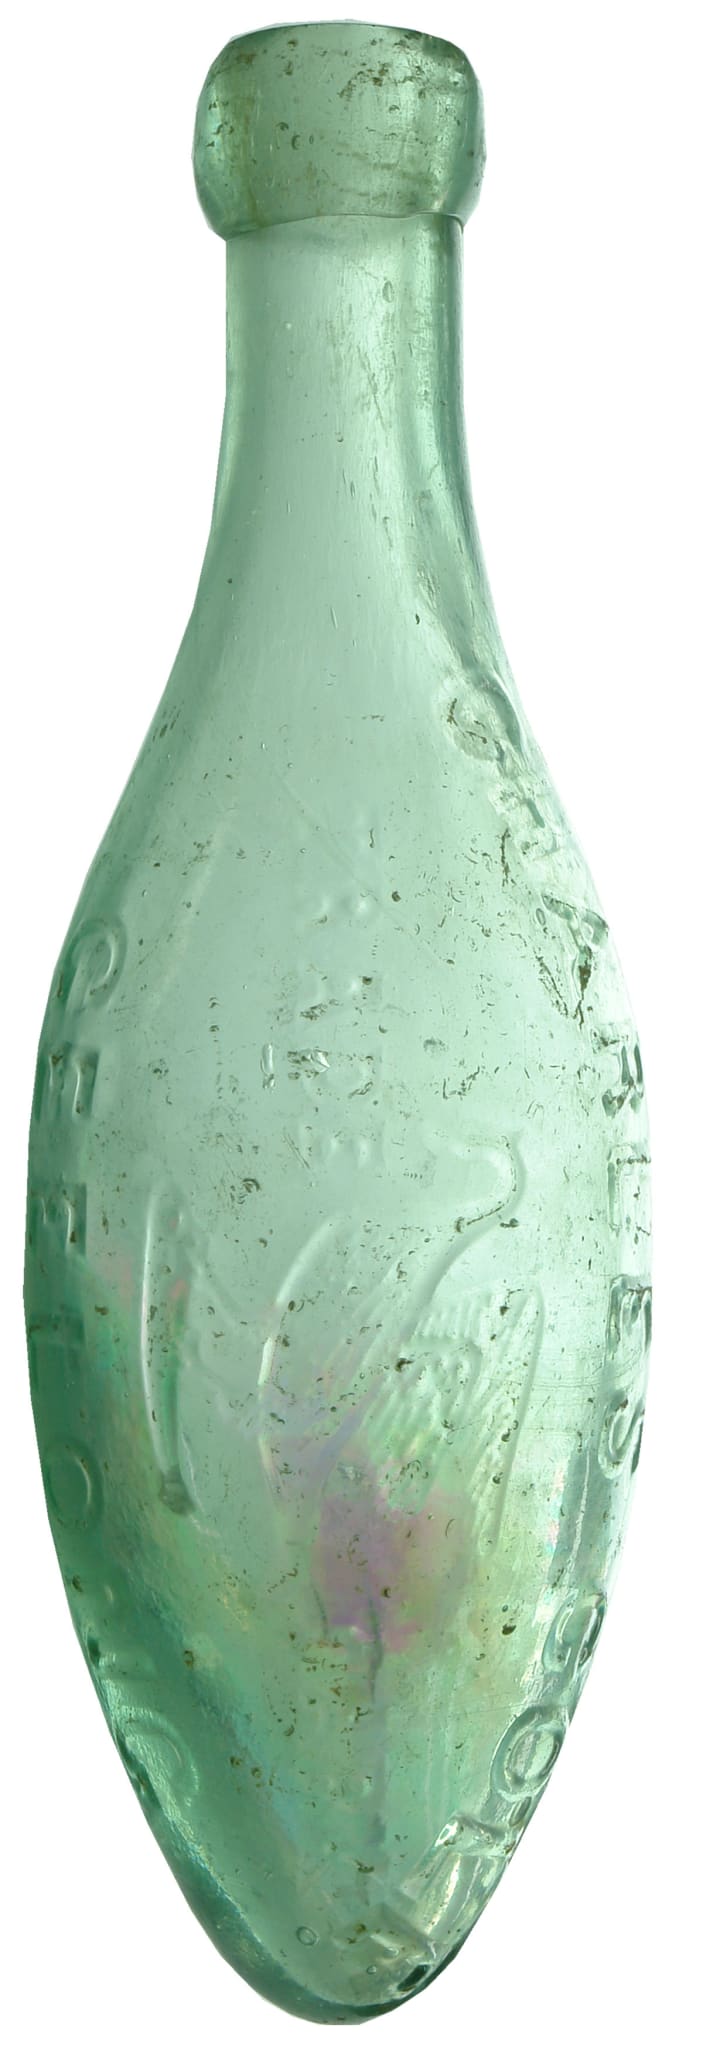 Charles Cole Geelong Antique Torpedo Bottle